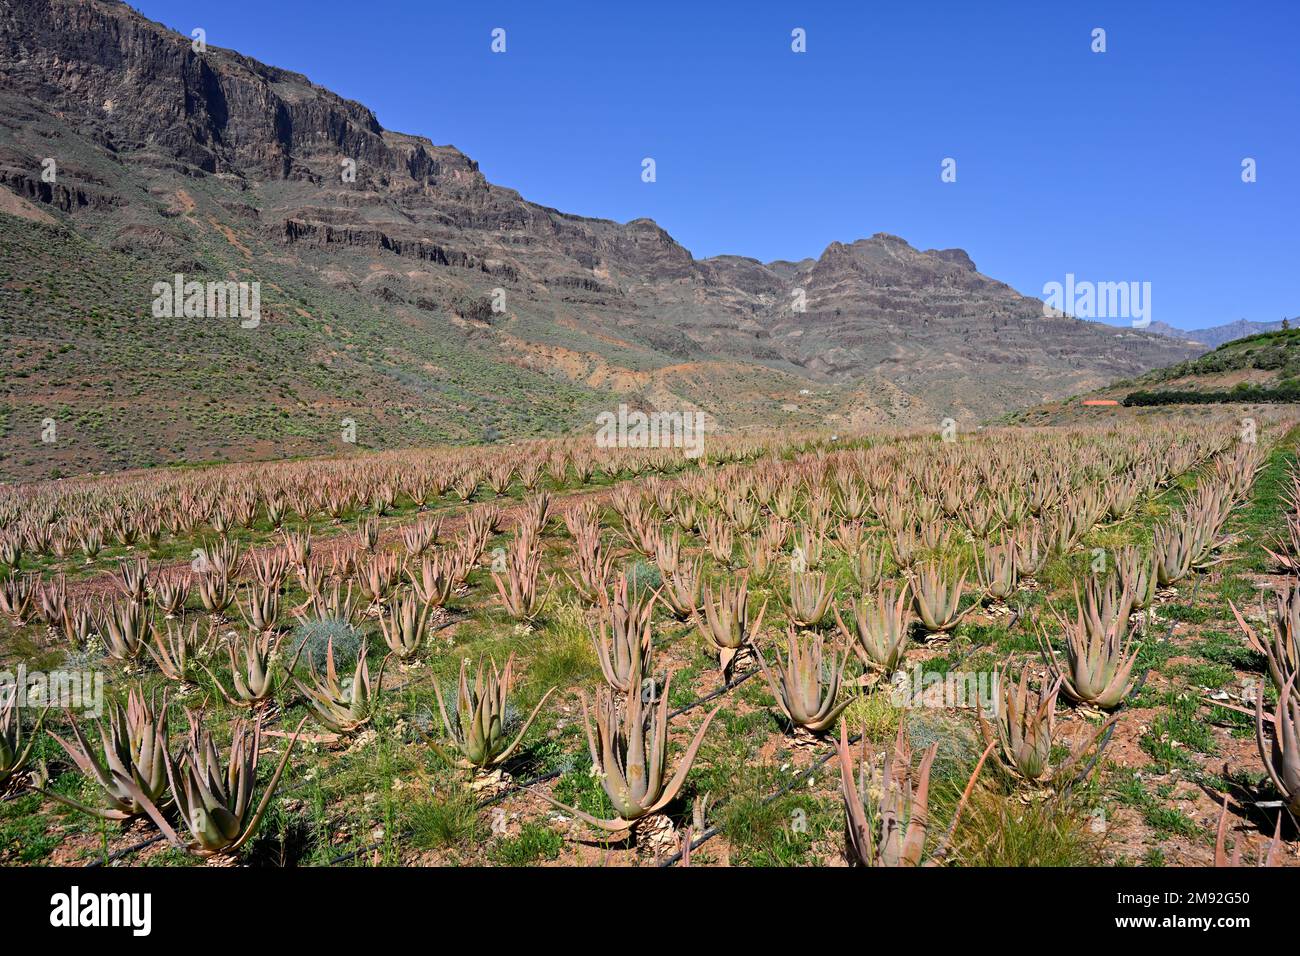 Fields growing the succulent plant Aloe barbadensis which is cultivate for extracting Aloe vera for cosmetic and medicinal uses. Mountain backdrop in Stock Photo